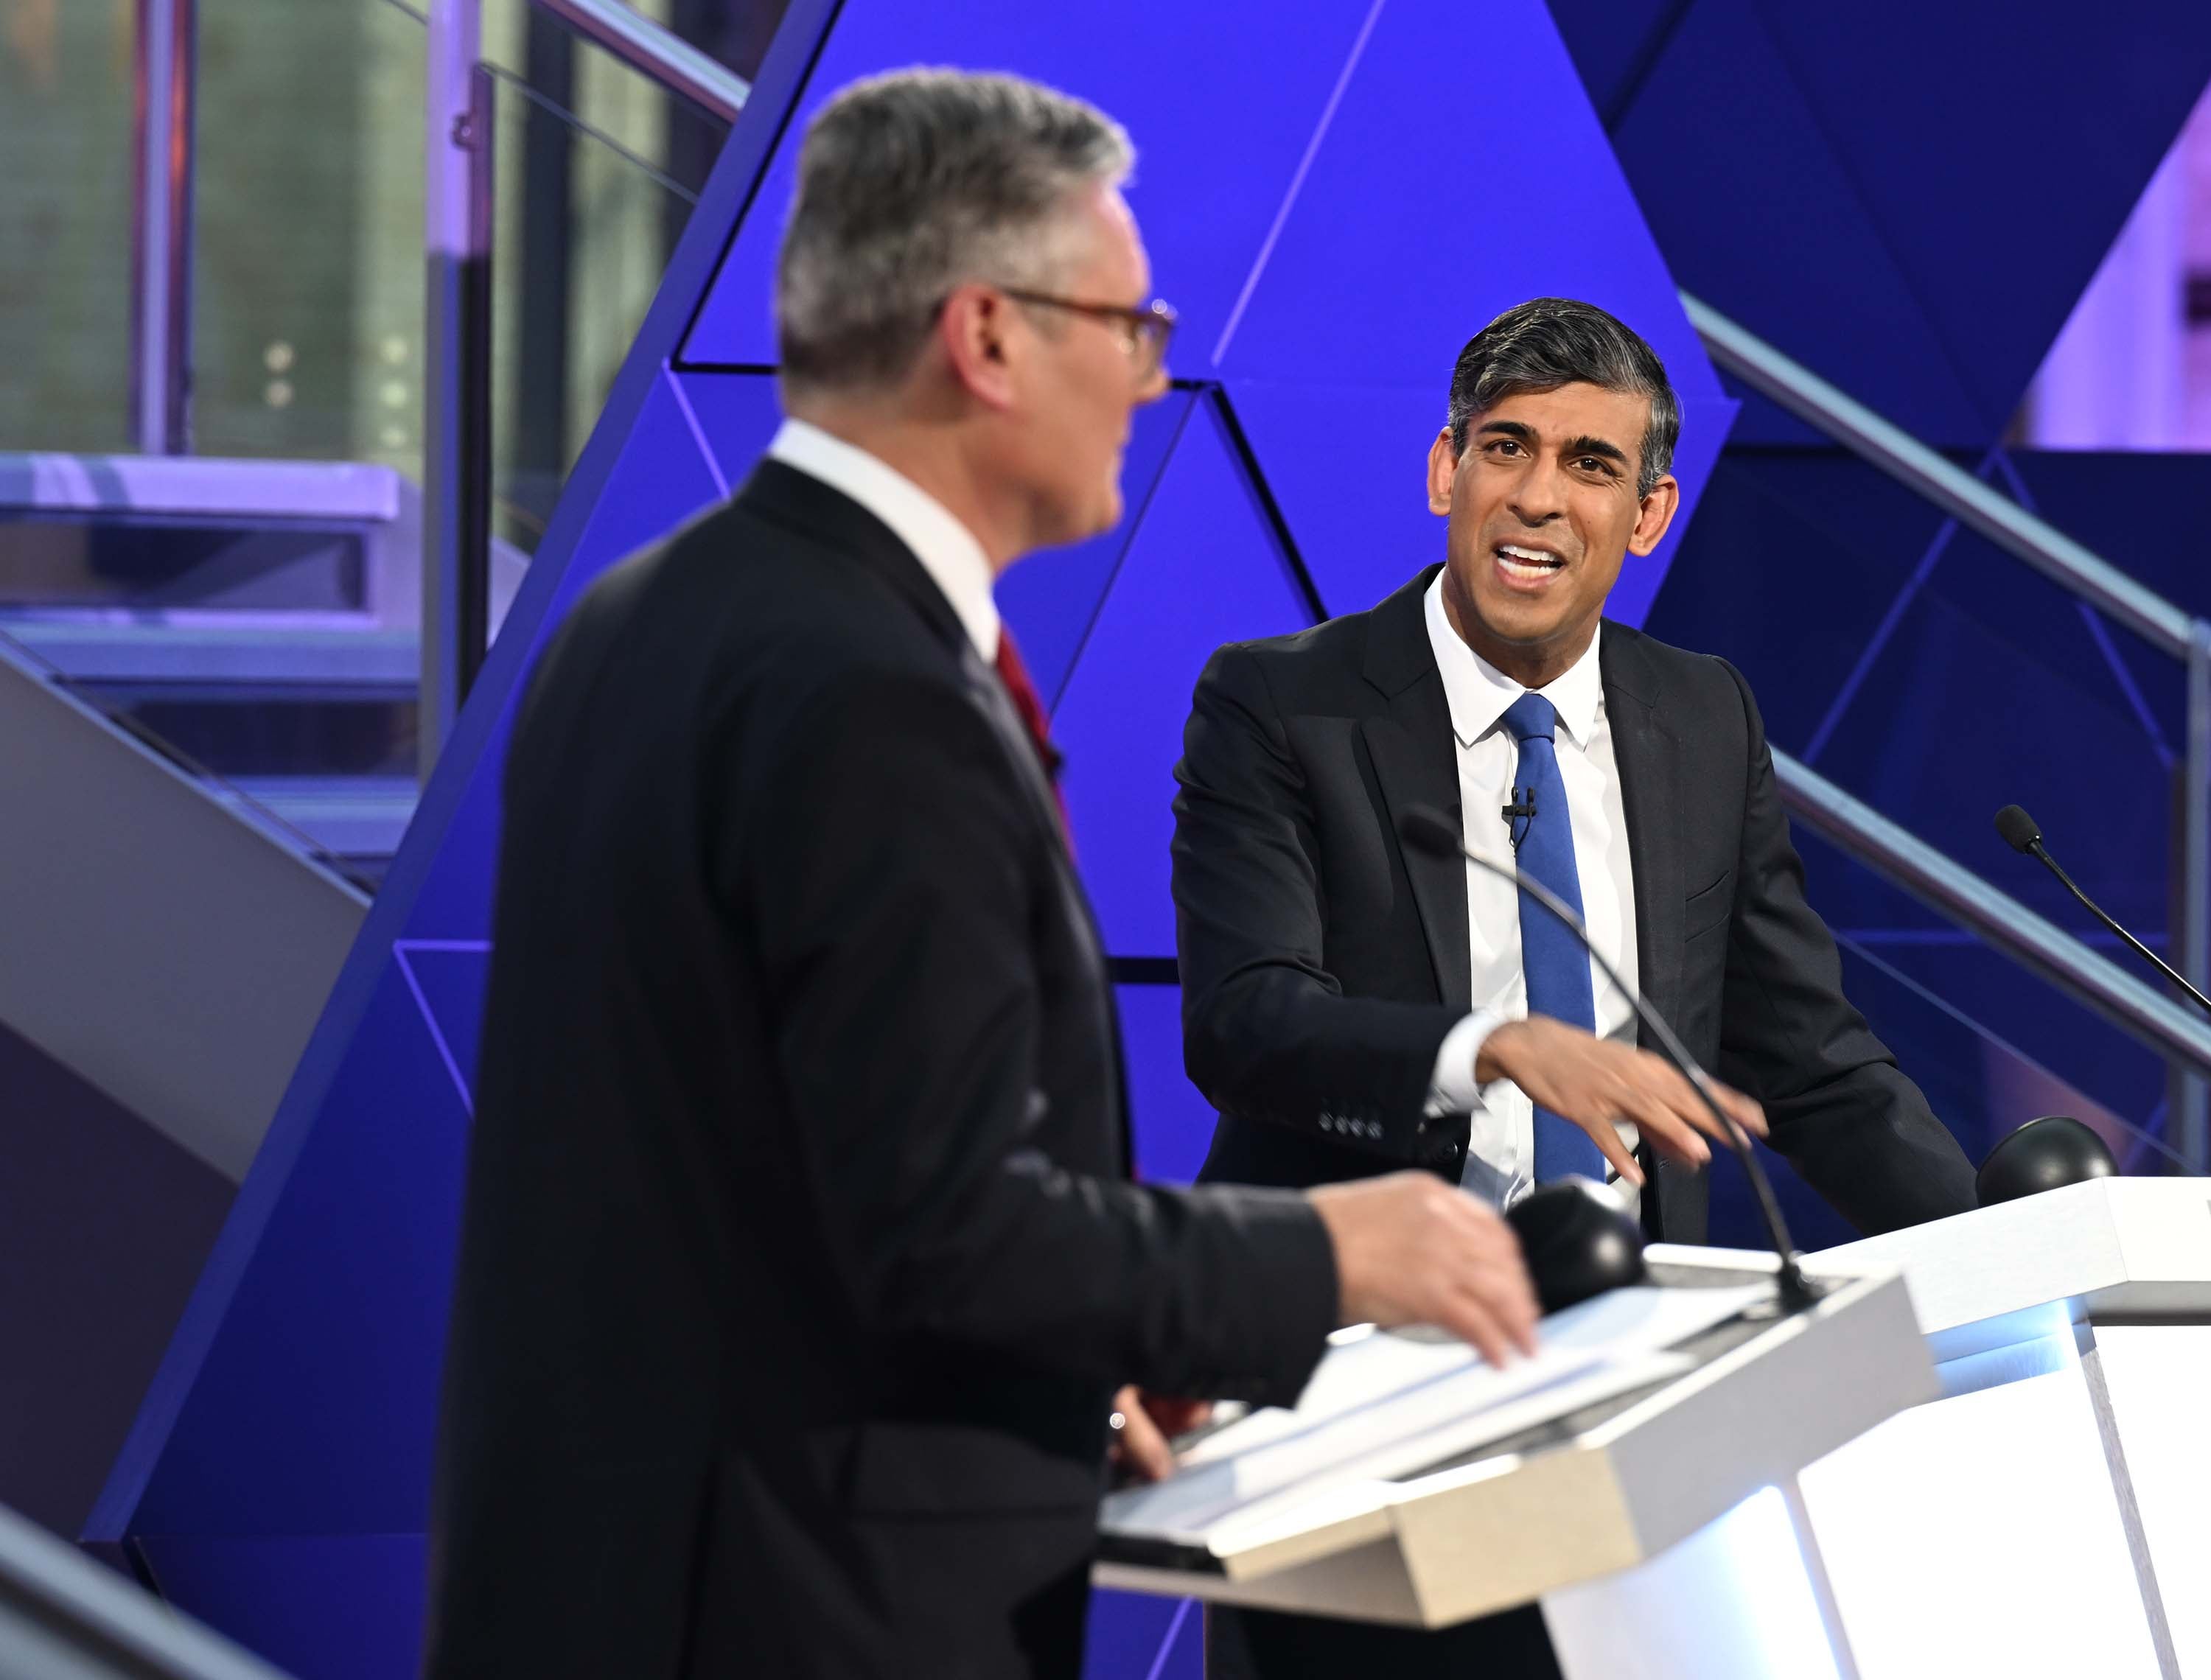 Rishi Sunak has come under pressure over the election betting scandal